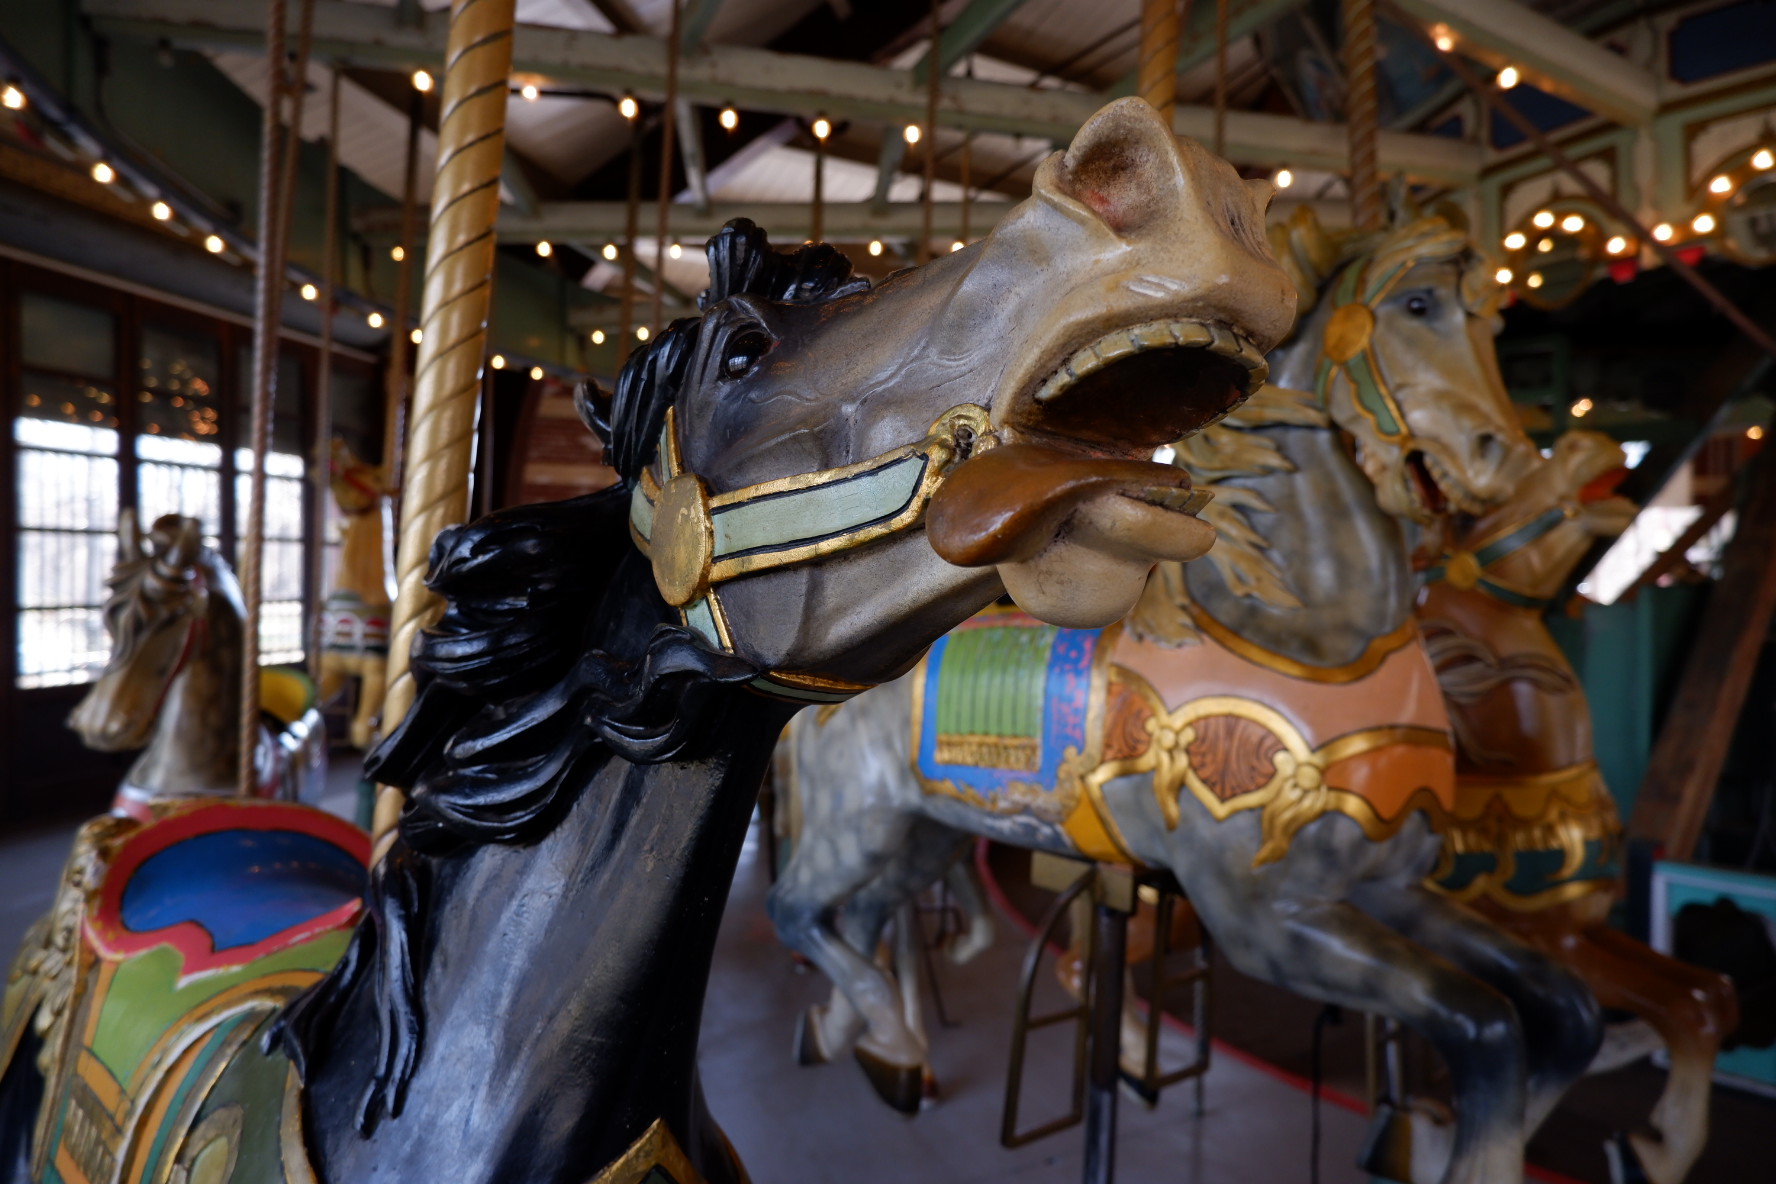 A close-up of a carved black stallion with lolling tongue and wind-blown mane at the Prospect Park Carousel